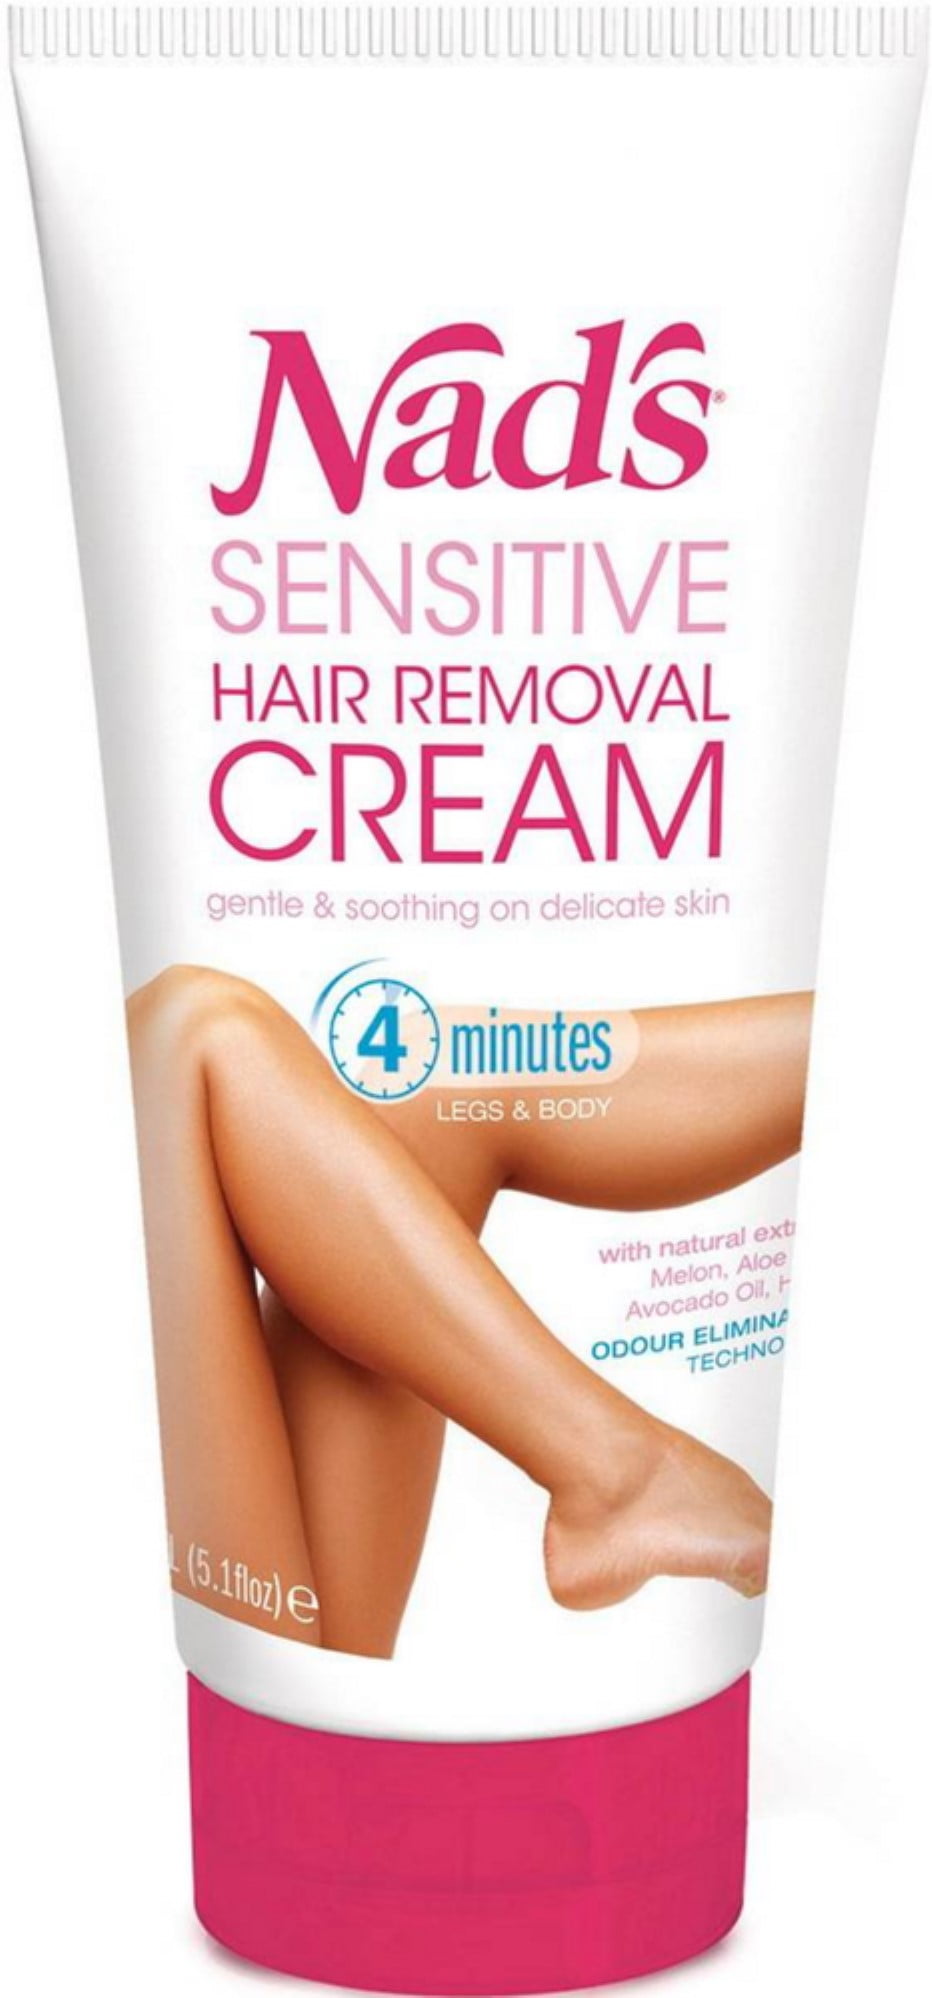 Nad's Hair Removal Cream - Gentle & Soothing Hair Removal For Women -  Sensitive Depilatory Cream For Body & Legs,  Oz 